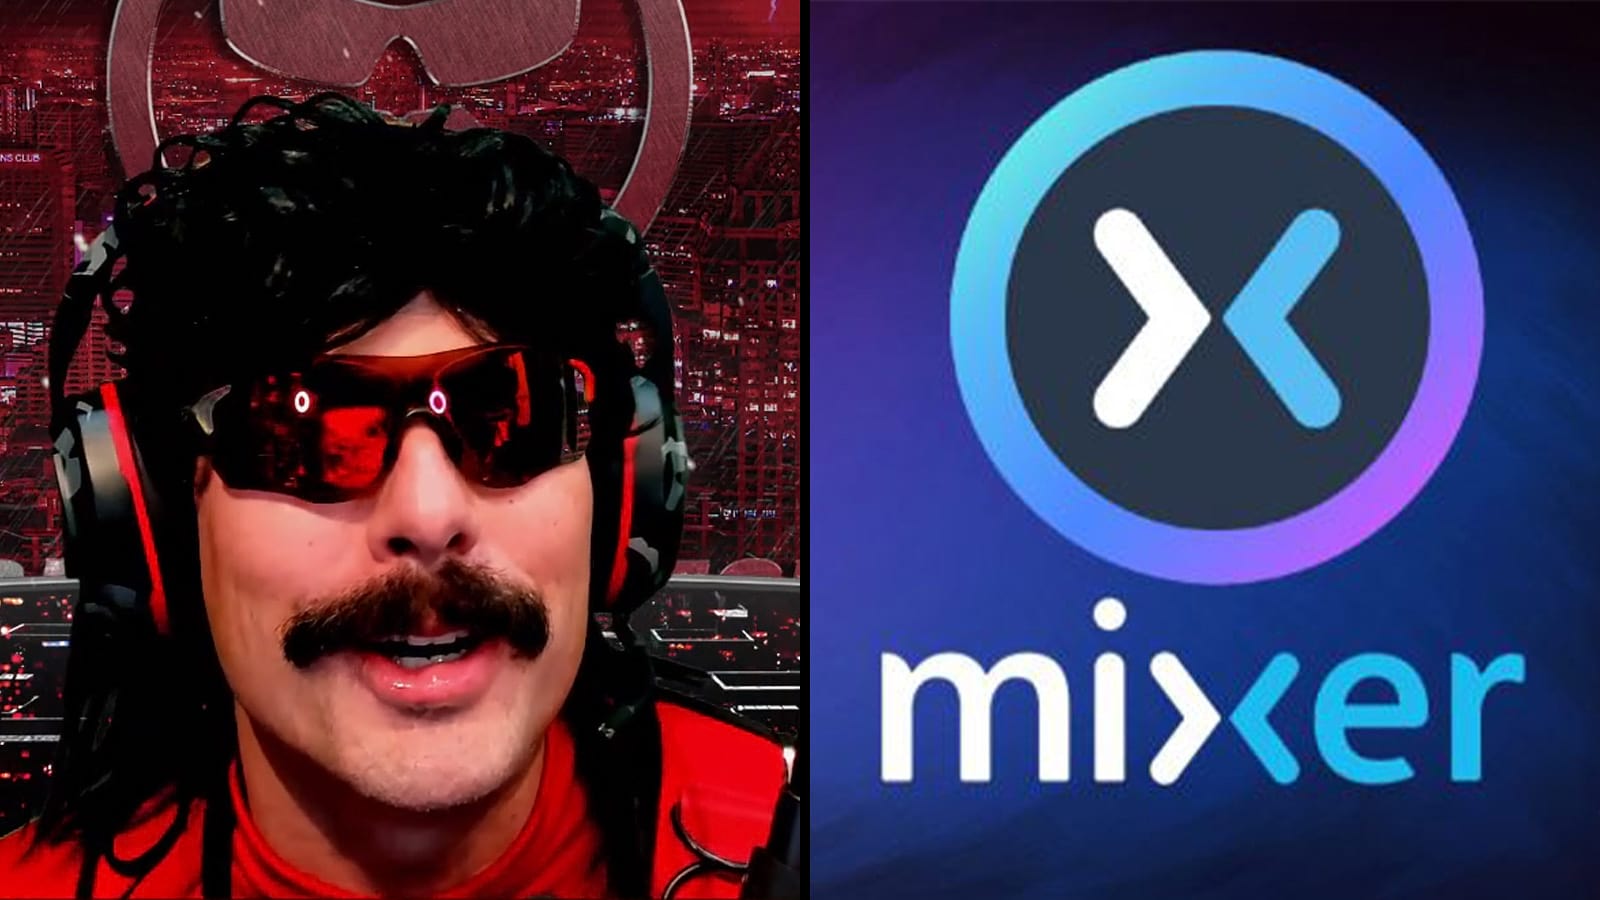 Dr unveils his new song about streamers moving to Mixer - Dexerto